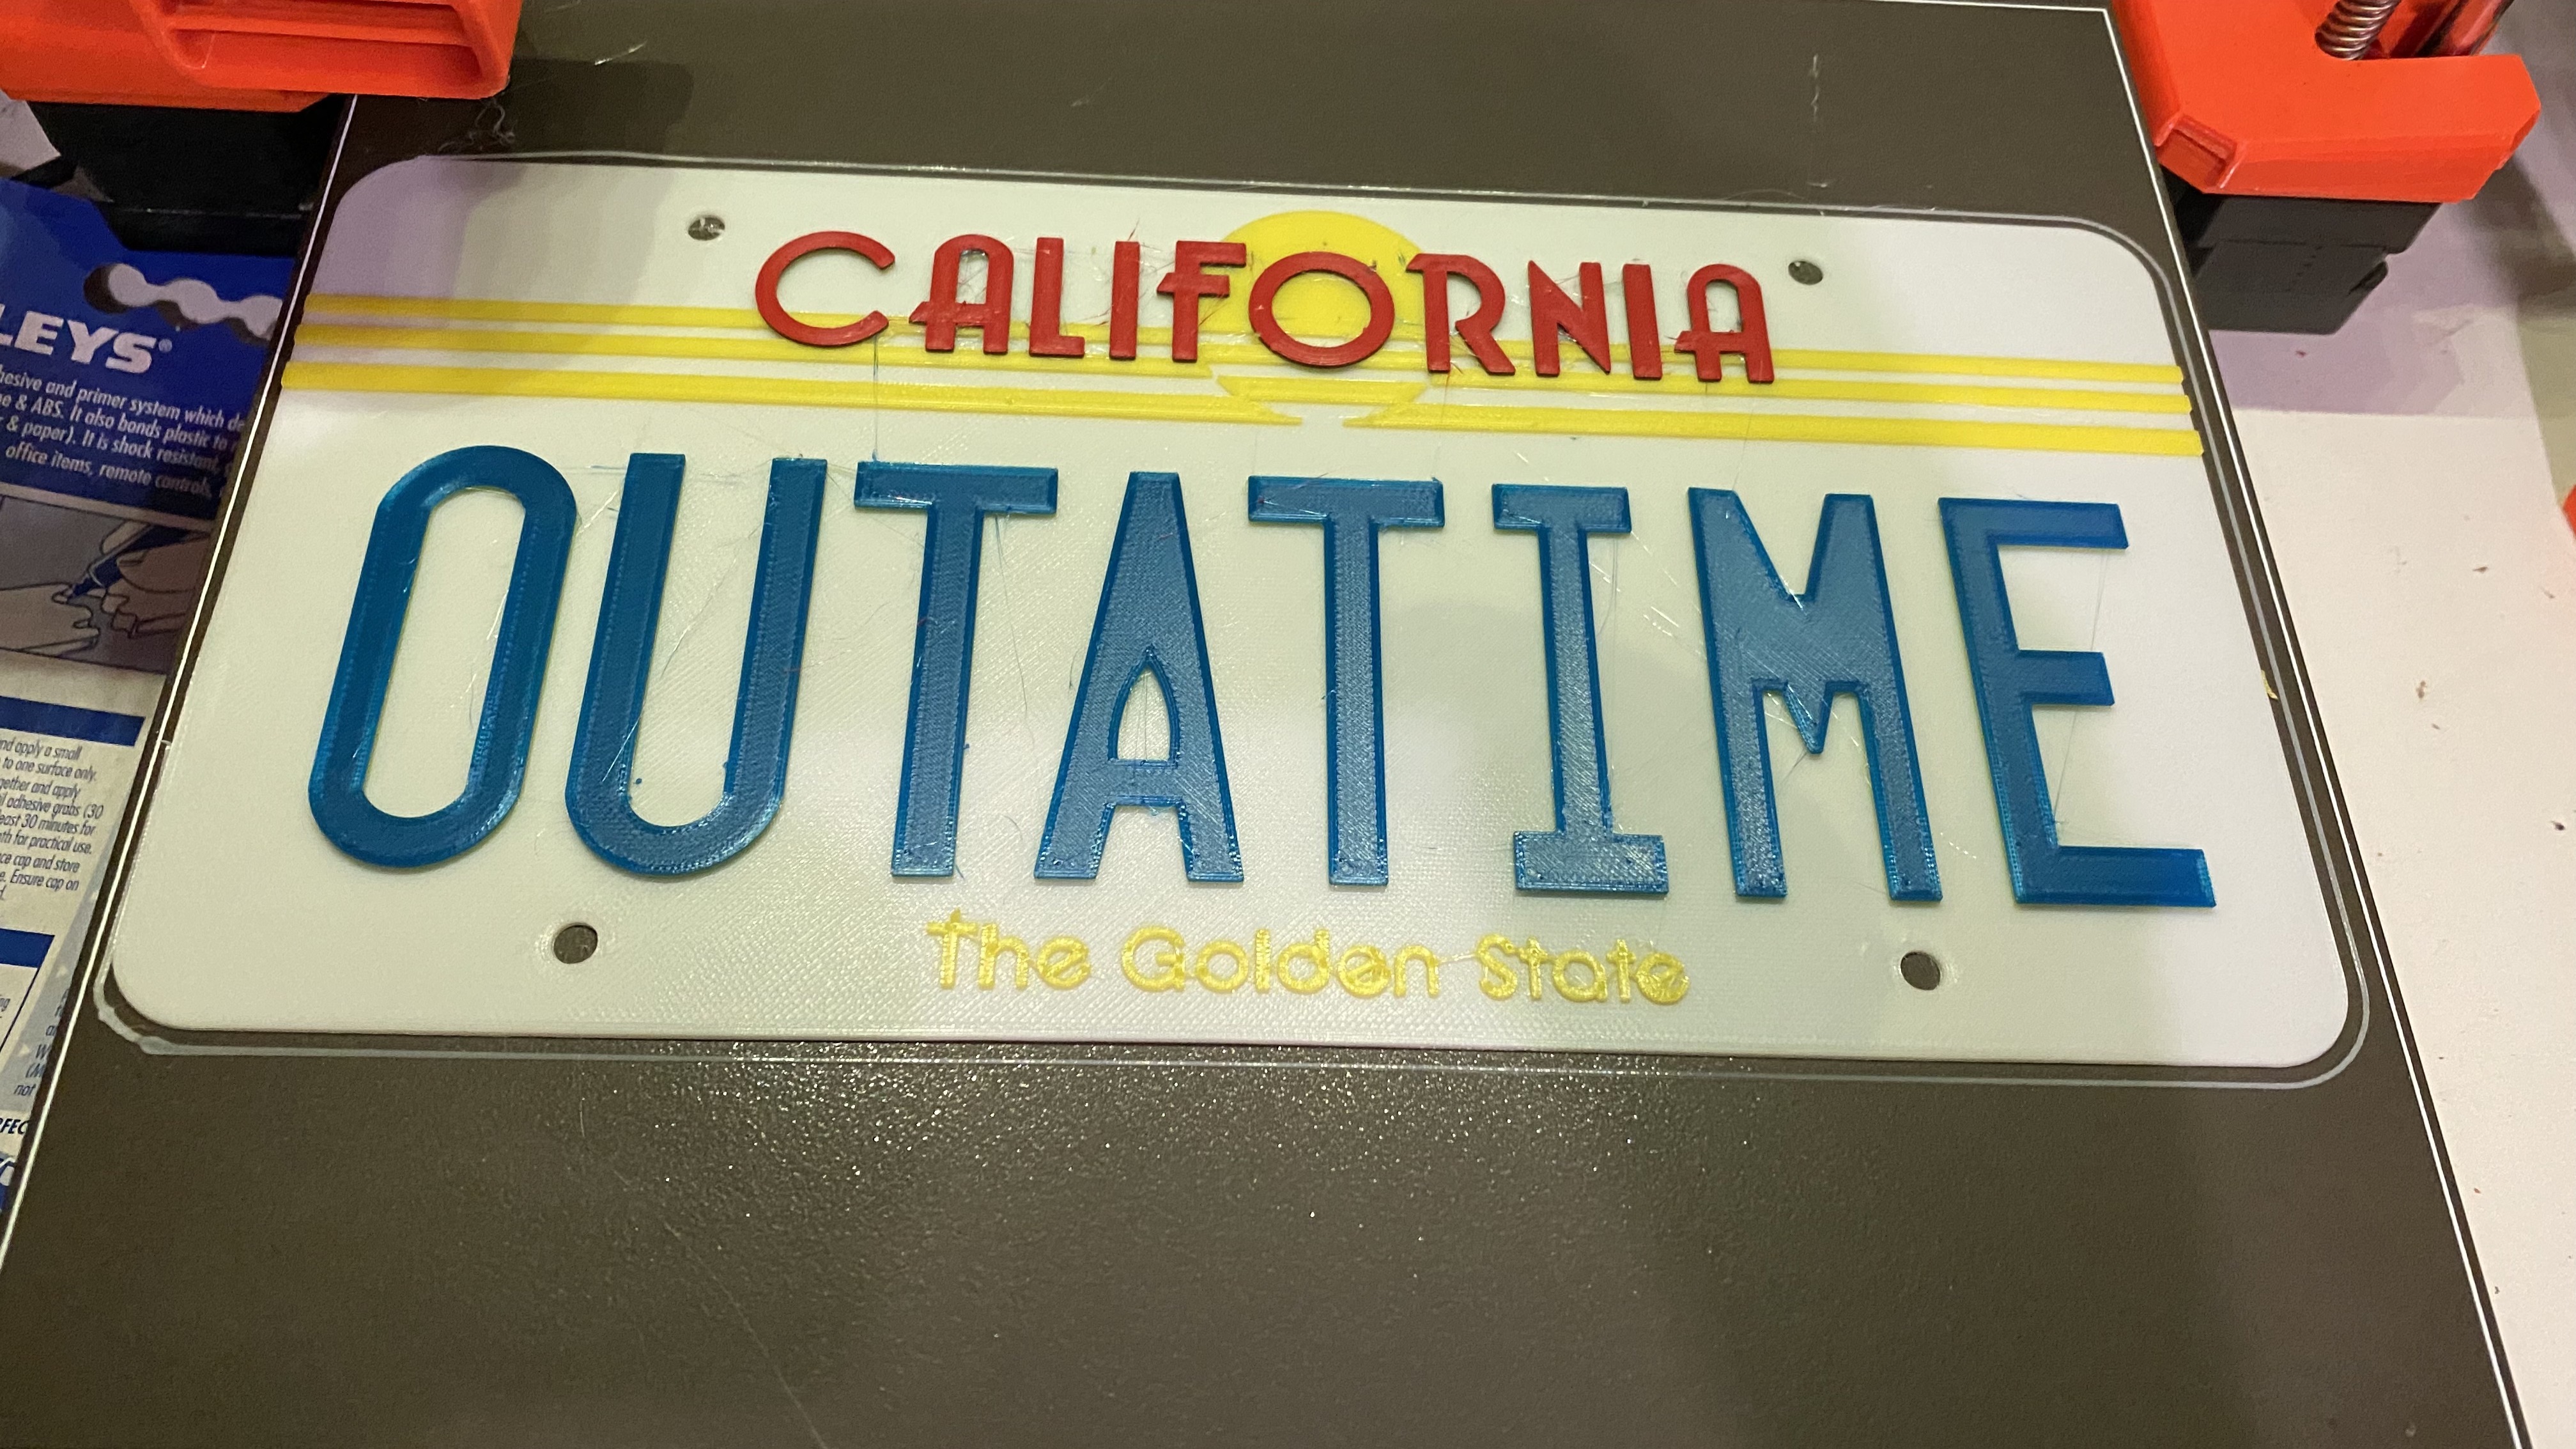 'OUTATIME' Back to the Future License Plate